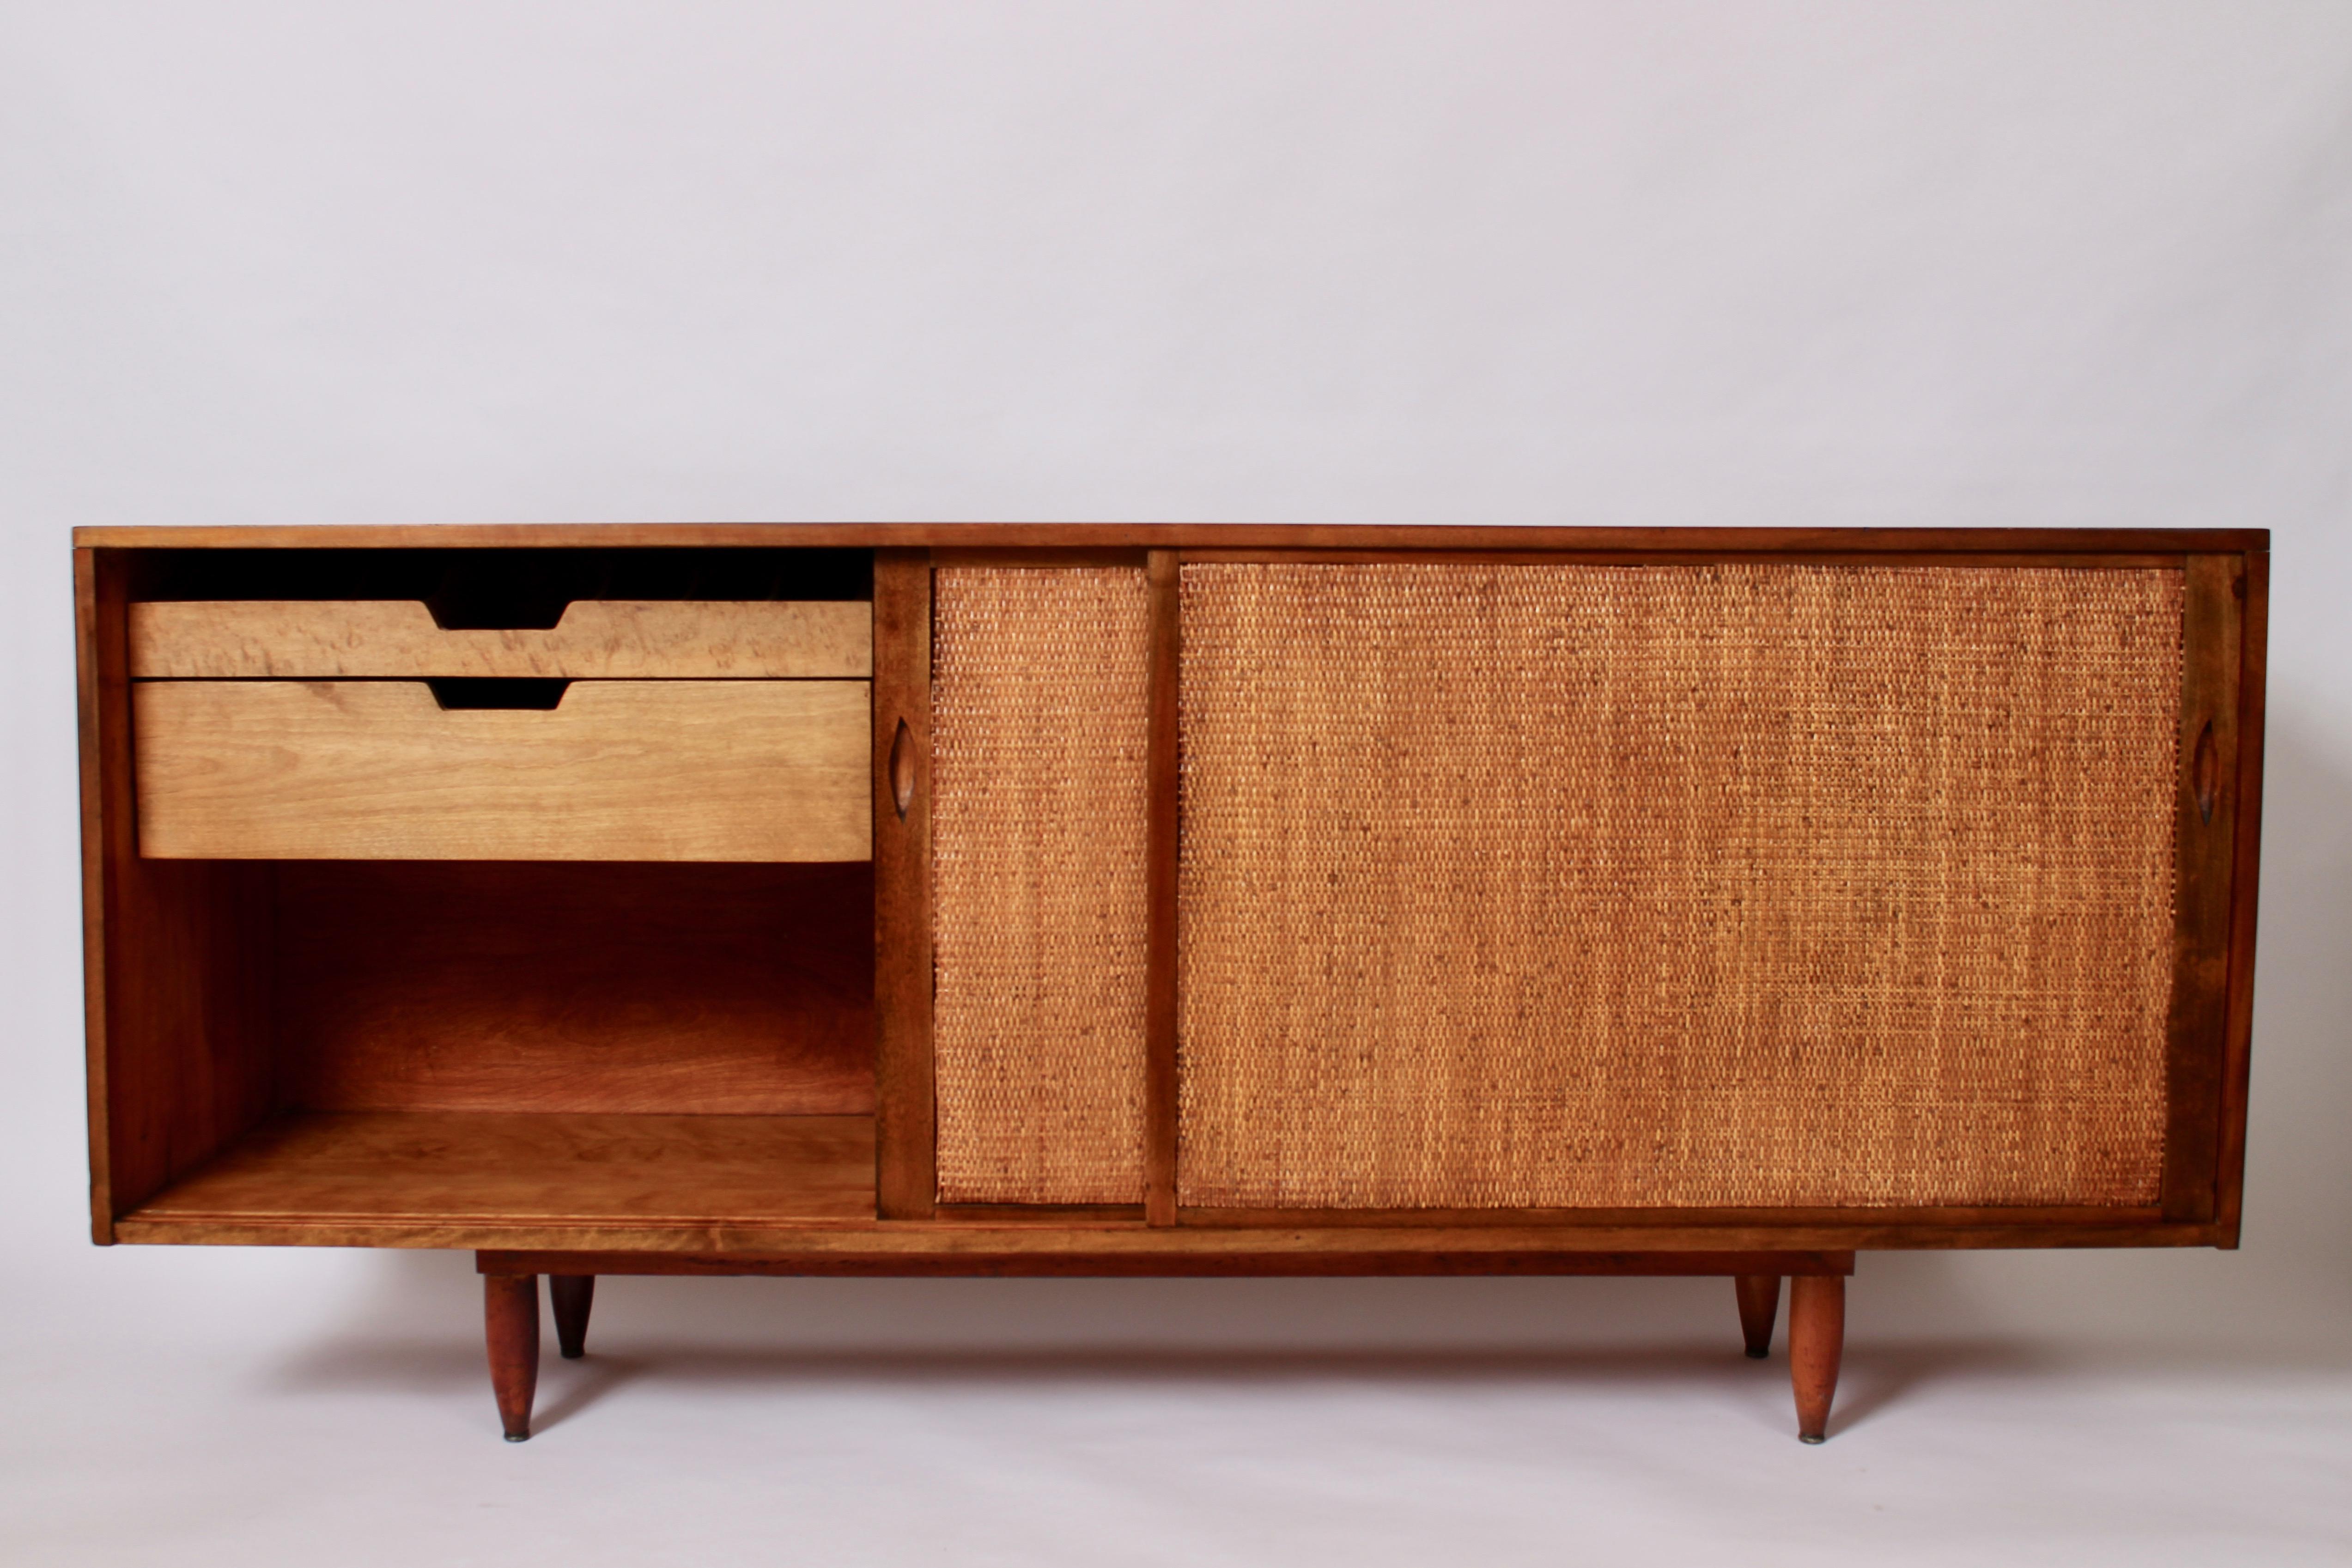 Substantial Six Foot Solid Walnut and Split Reed Credenza by Phillip Lloyd Powell, Early 1950's.  Featuring a rectangular Walnut frame and sliding Split Reed front. Dovetail cabinet construction, doweled legs, two 25W Bird's-Eye Maple left side